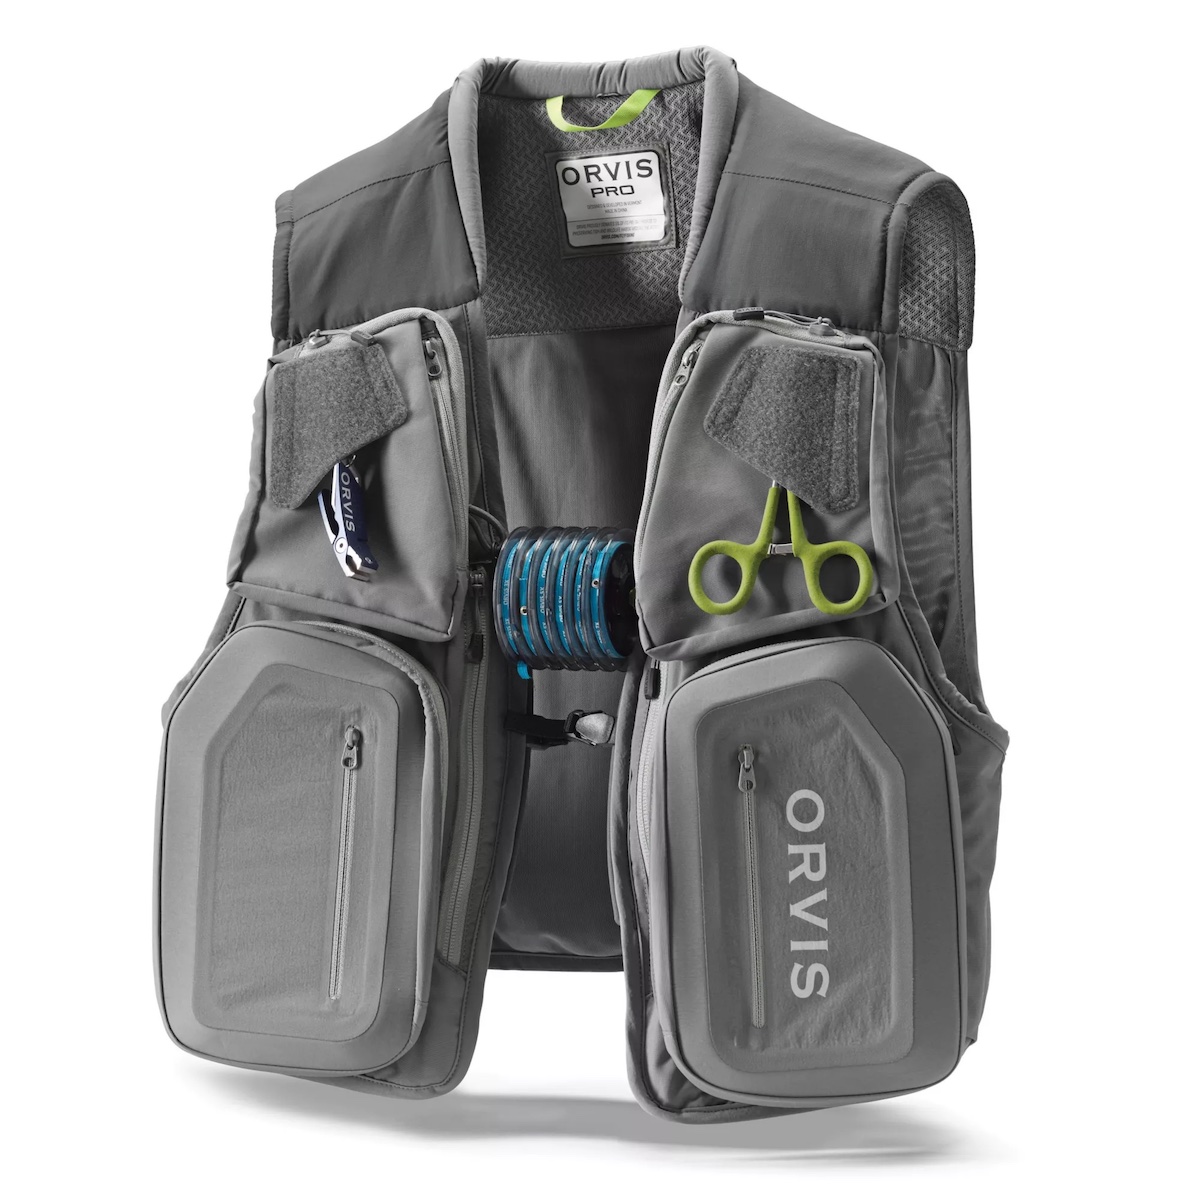 Fly Fishing Vests to Add to Your Gear Collection - Rod and Reel Fly